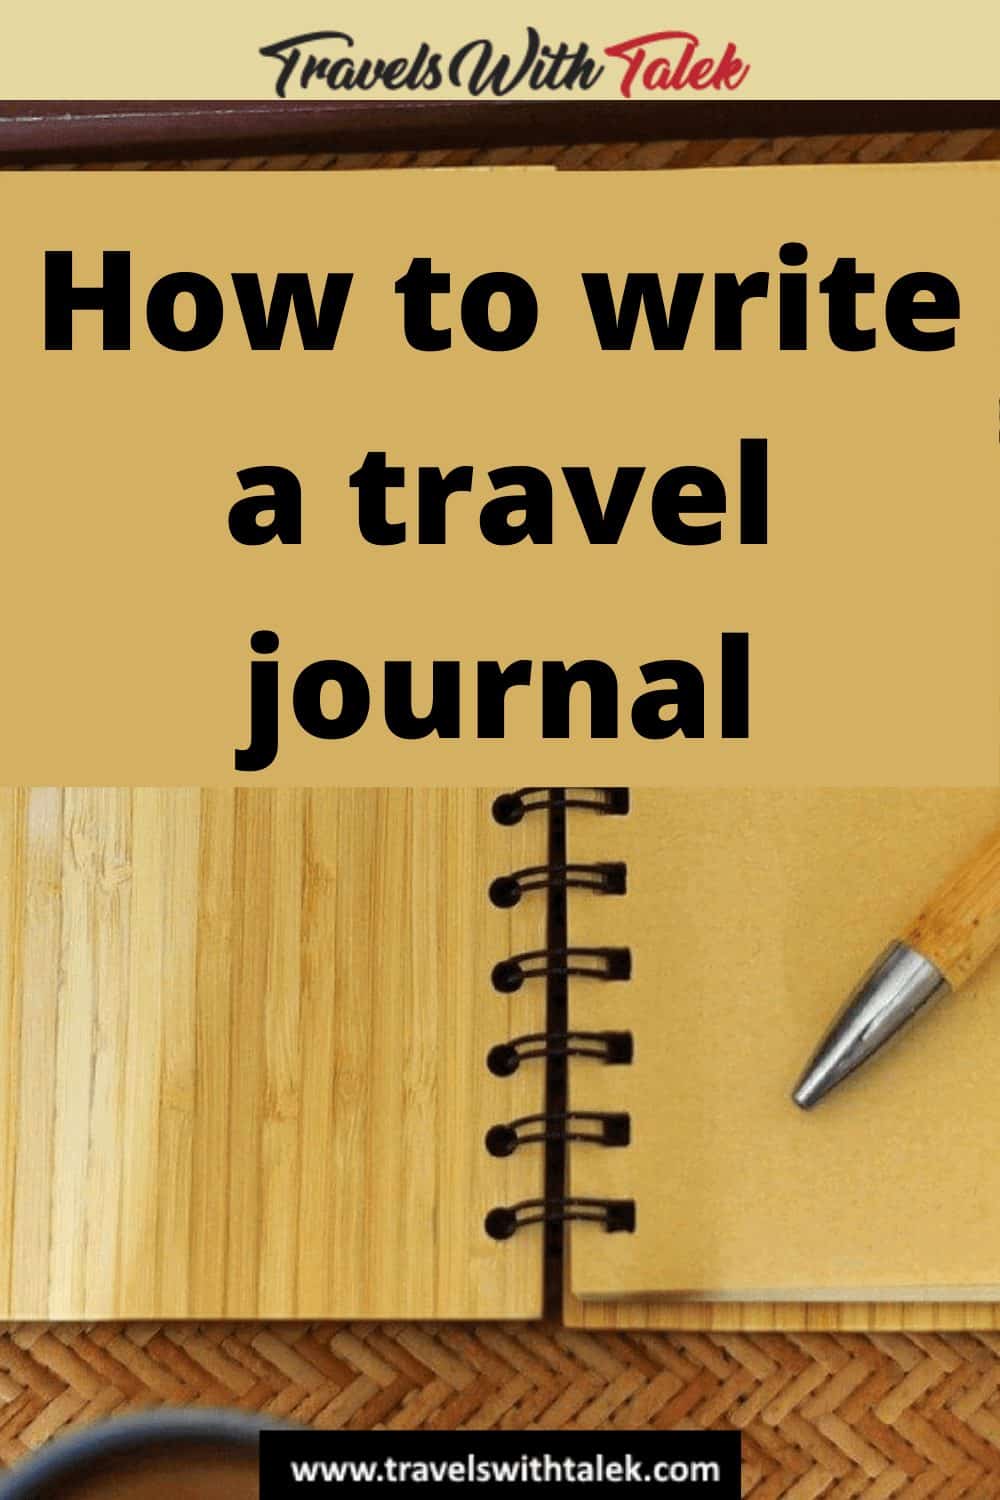 how-to-write-a-travel-journal-for-lifetime-memories-travels-with-talek